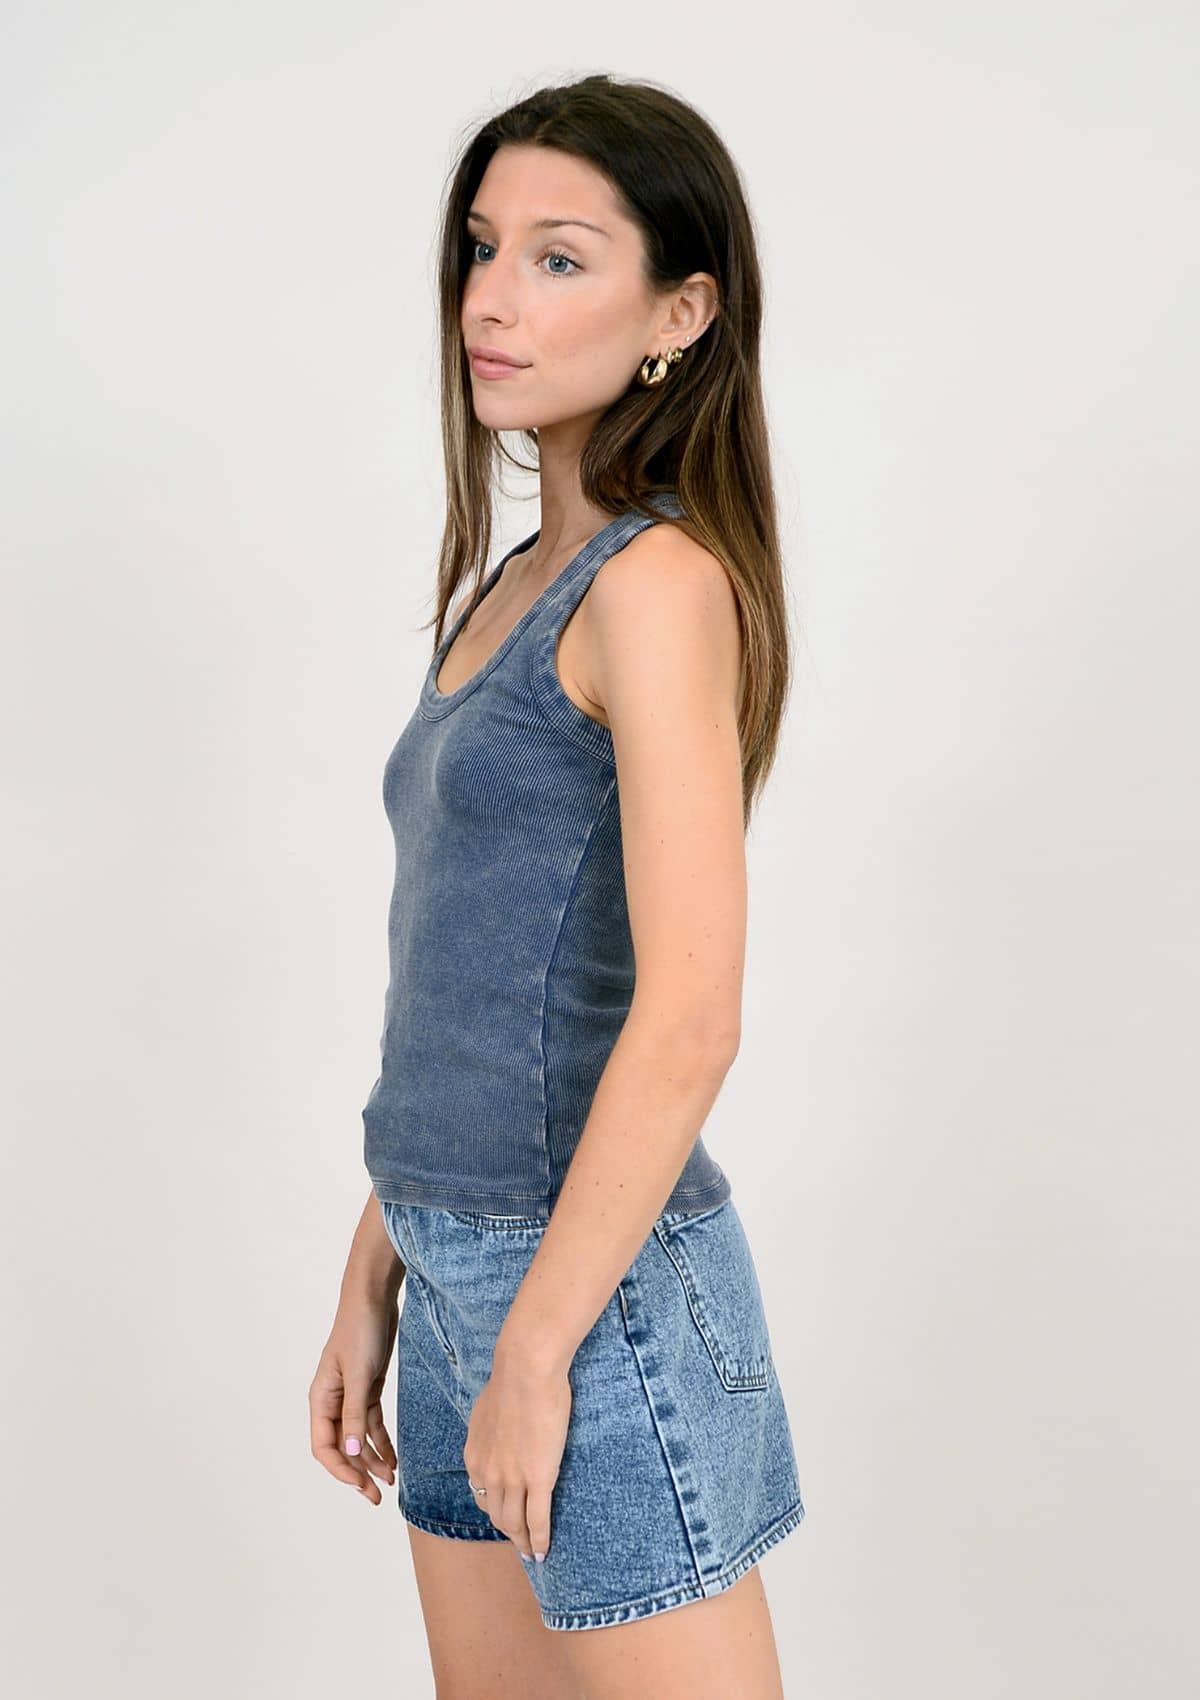 Casual Tops-clothing-Fashion-Ruby Jane.